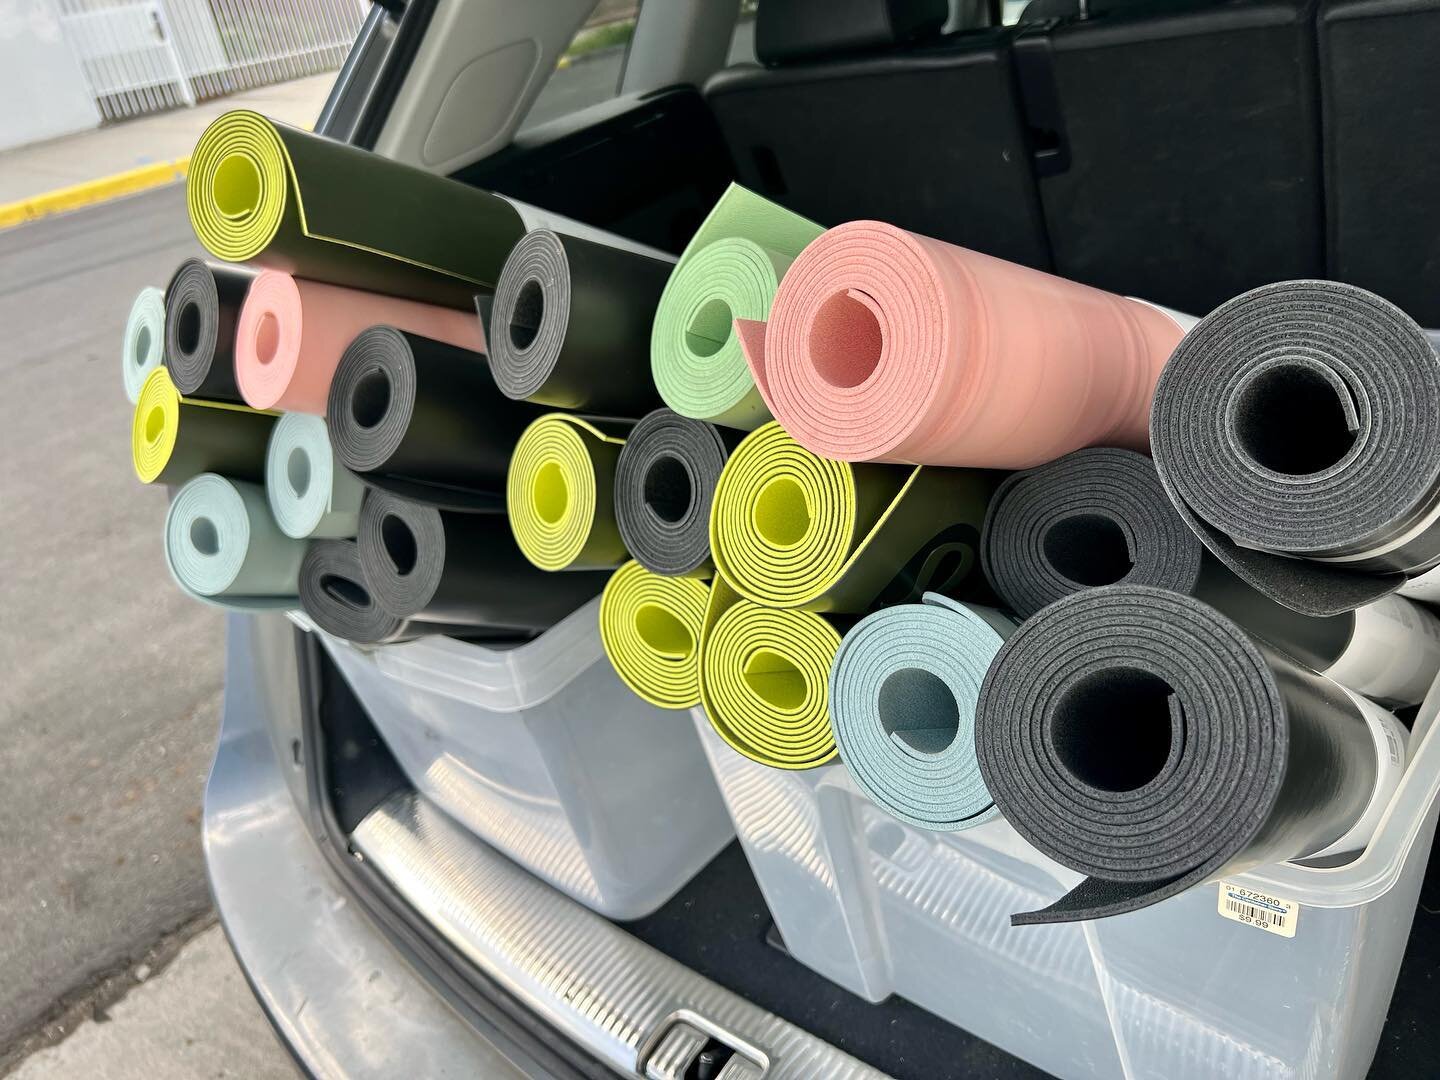 Delivered new lululemon yoga mats to Girls Inc of Metro Denver. Thank you lululemon Cherry Creek mall for making this possible. ❤️🥰🙏🏽🧘🏽